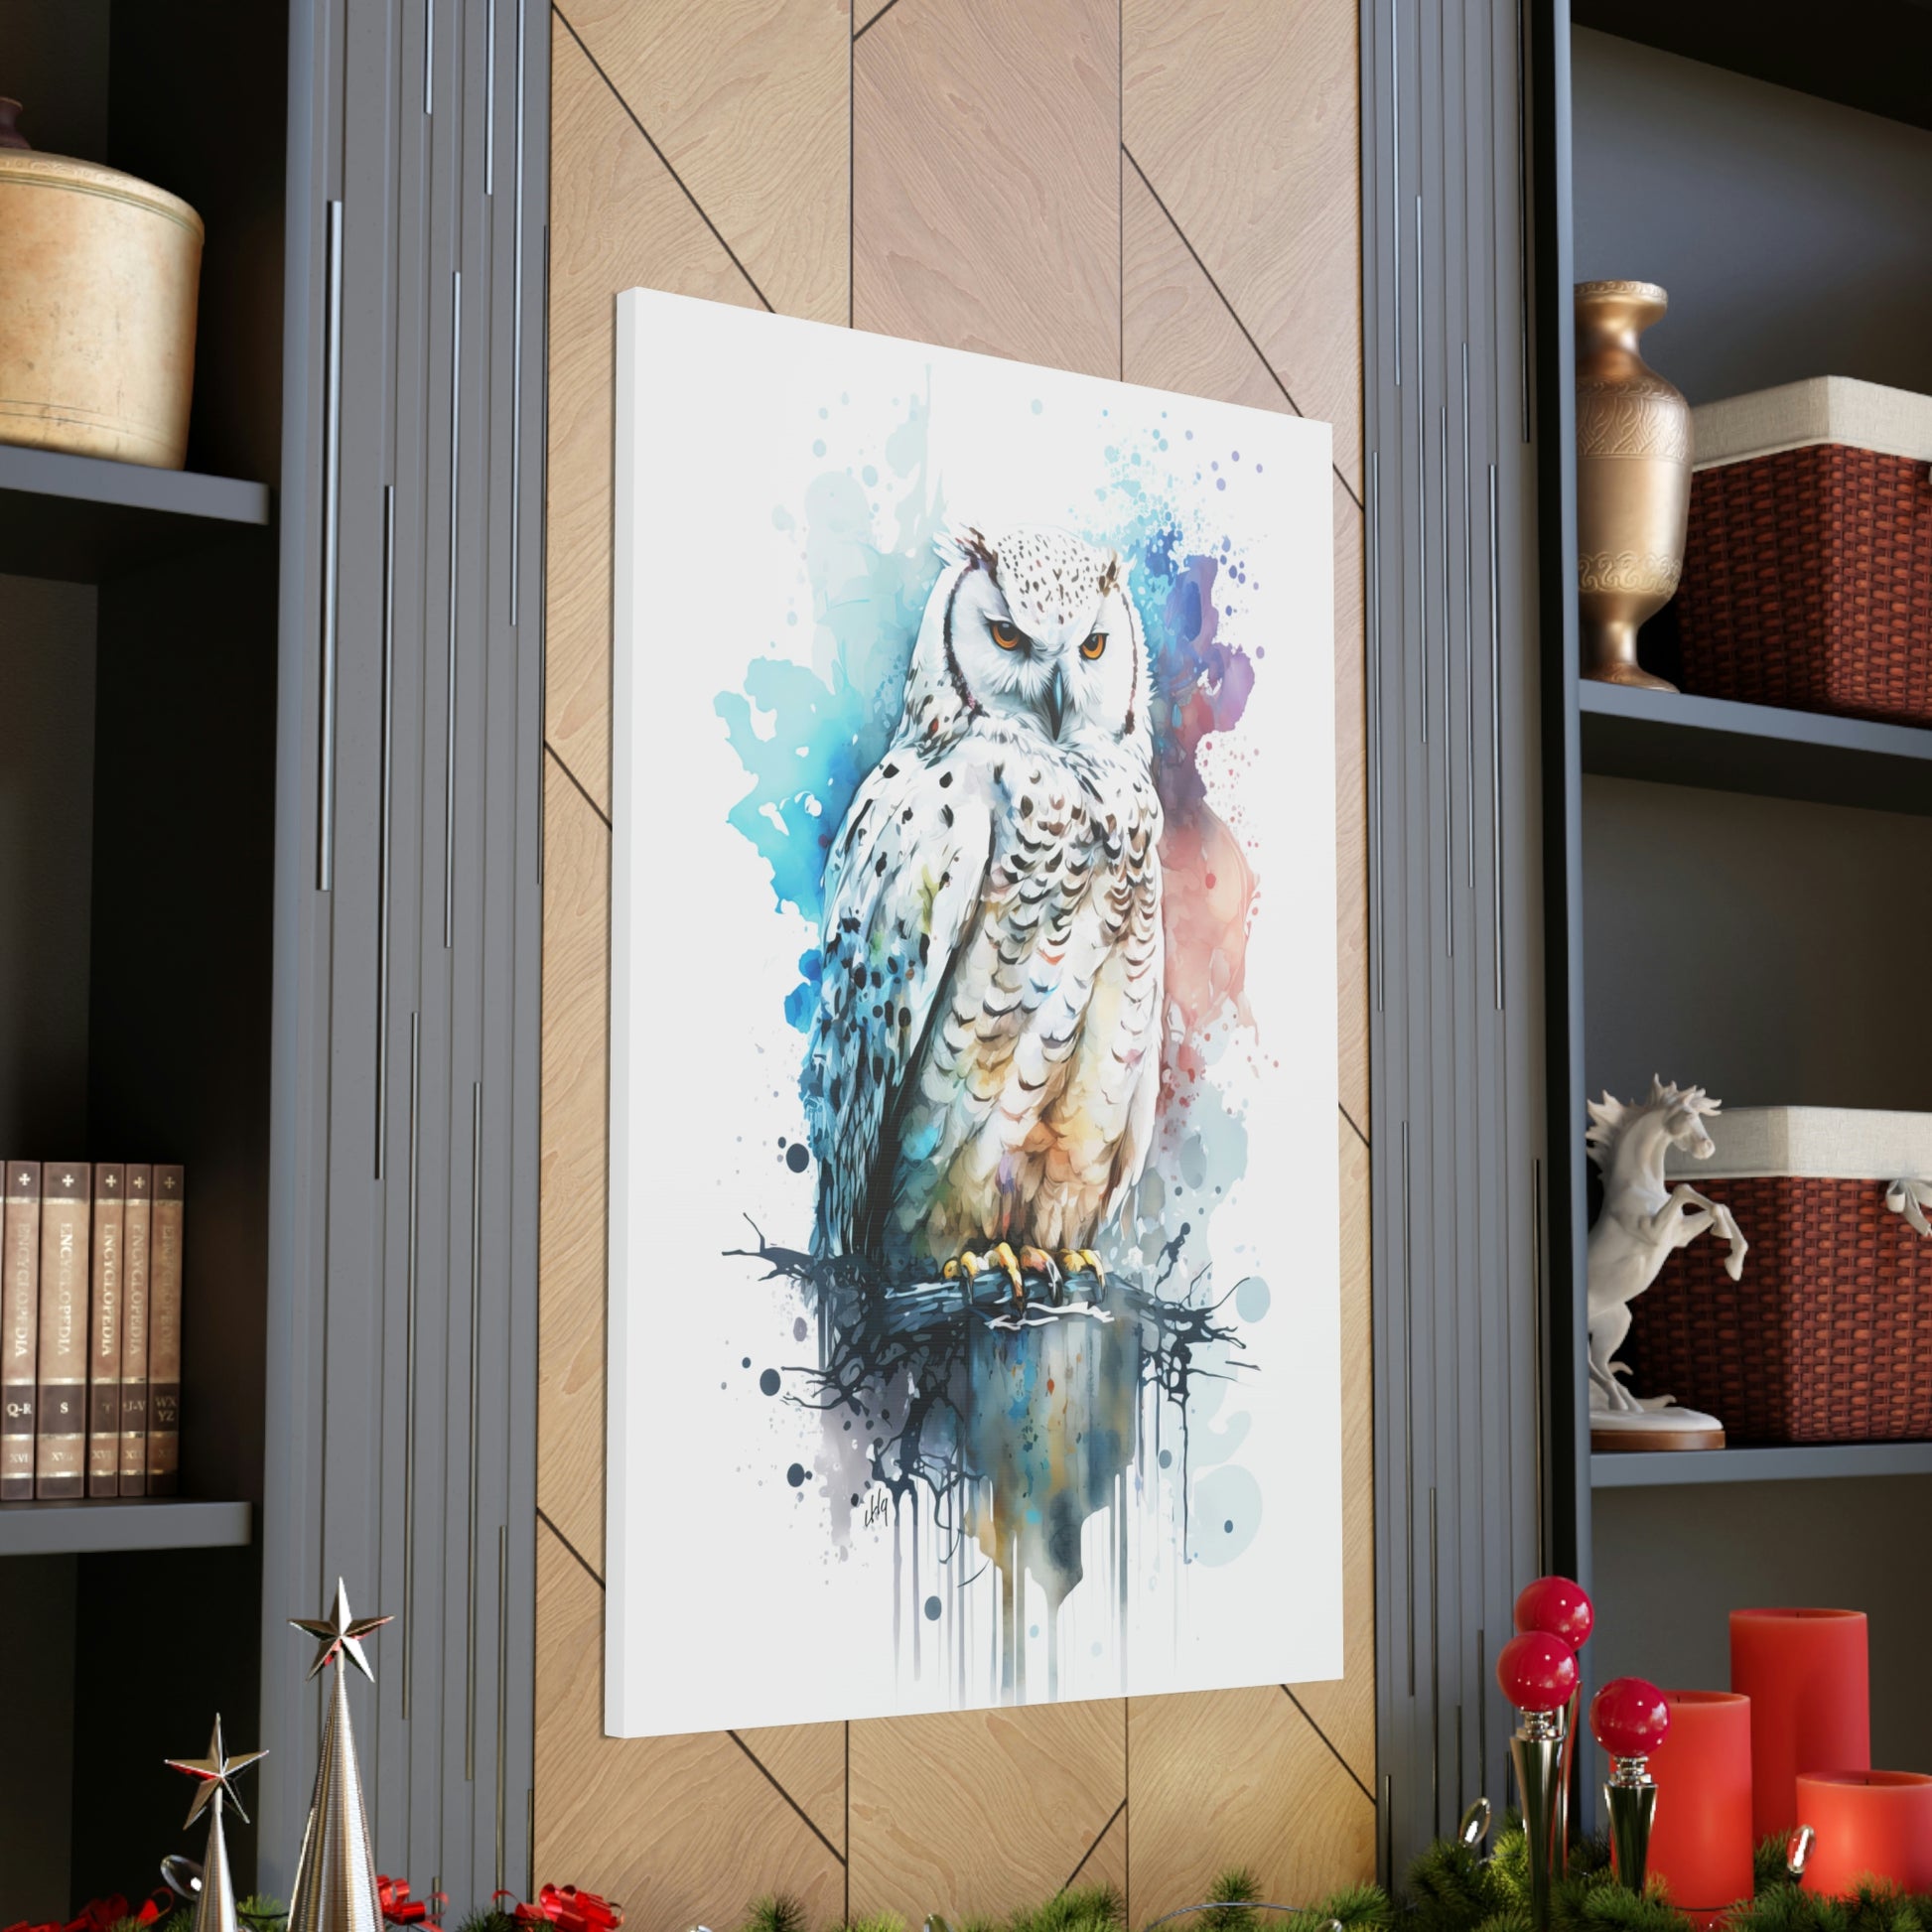 Snow Owl Wall Art from the Wildlife Collection captures the ethereal beauty and keen gaze of this nocturnal hunter on canvas. Its mesmerizing presence serves as a tranquil nod to the mysteries of nature, making it a fitting choice for spaces desiring a blend of elegance and wild inspiration.